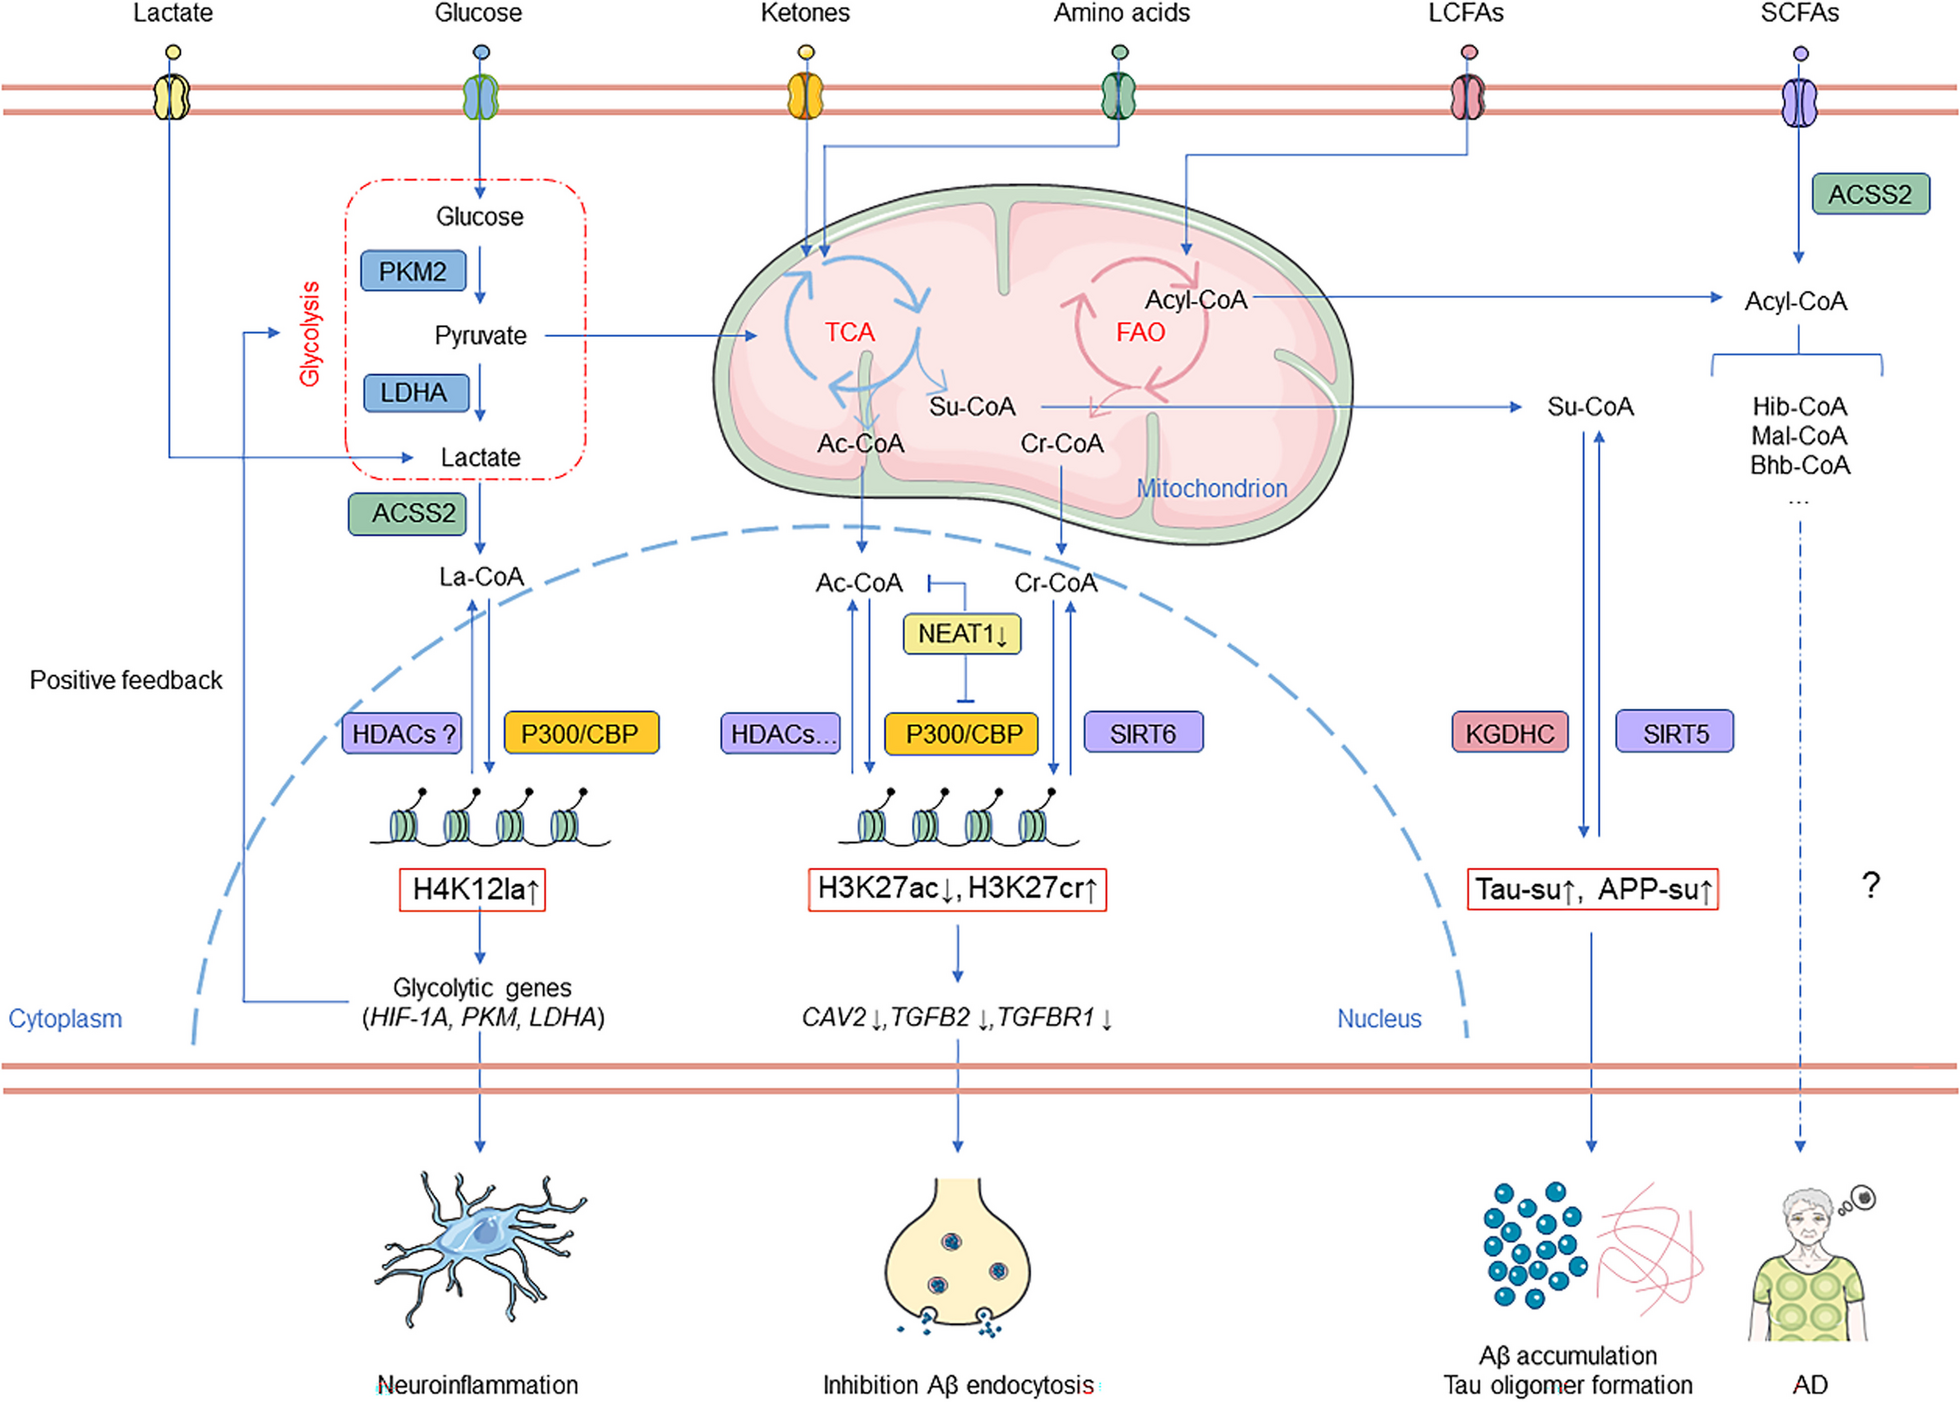 Novel histone post-translational modifications in Alzheimer’s disease: current advances and implications